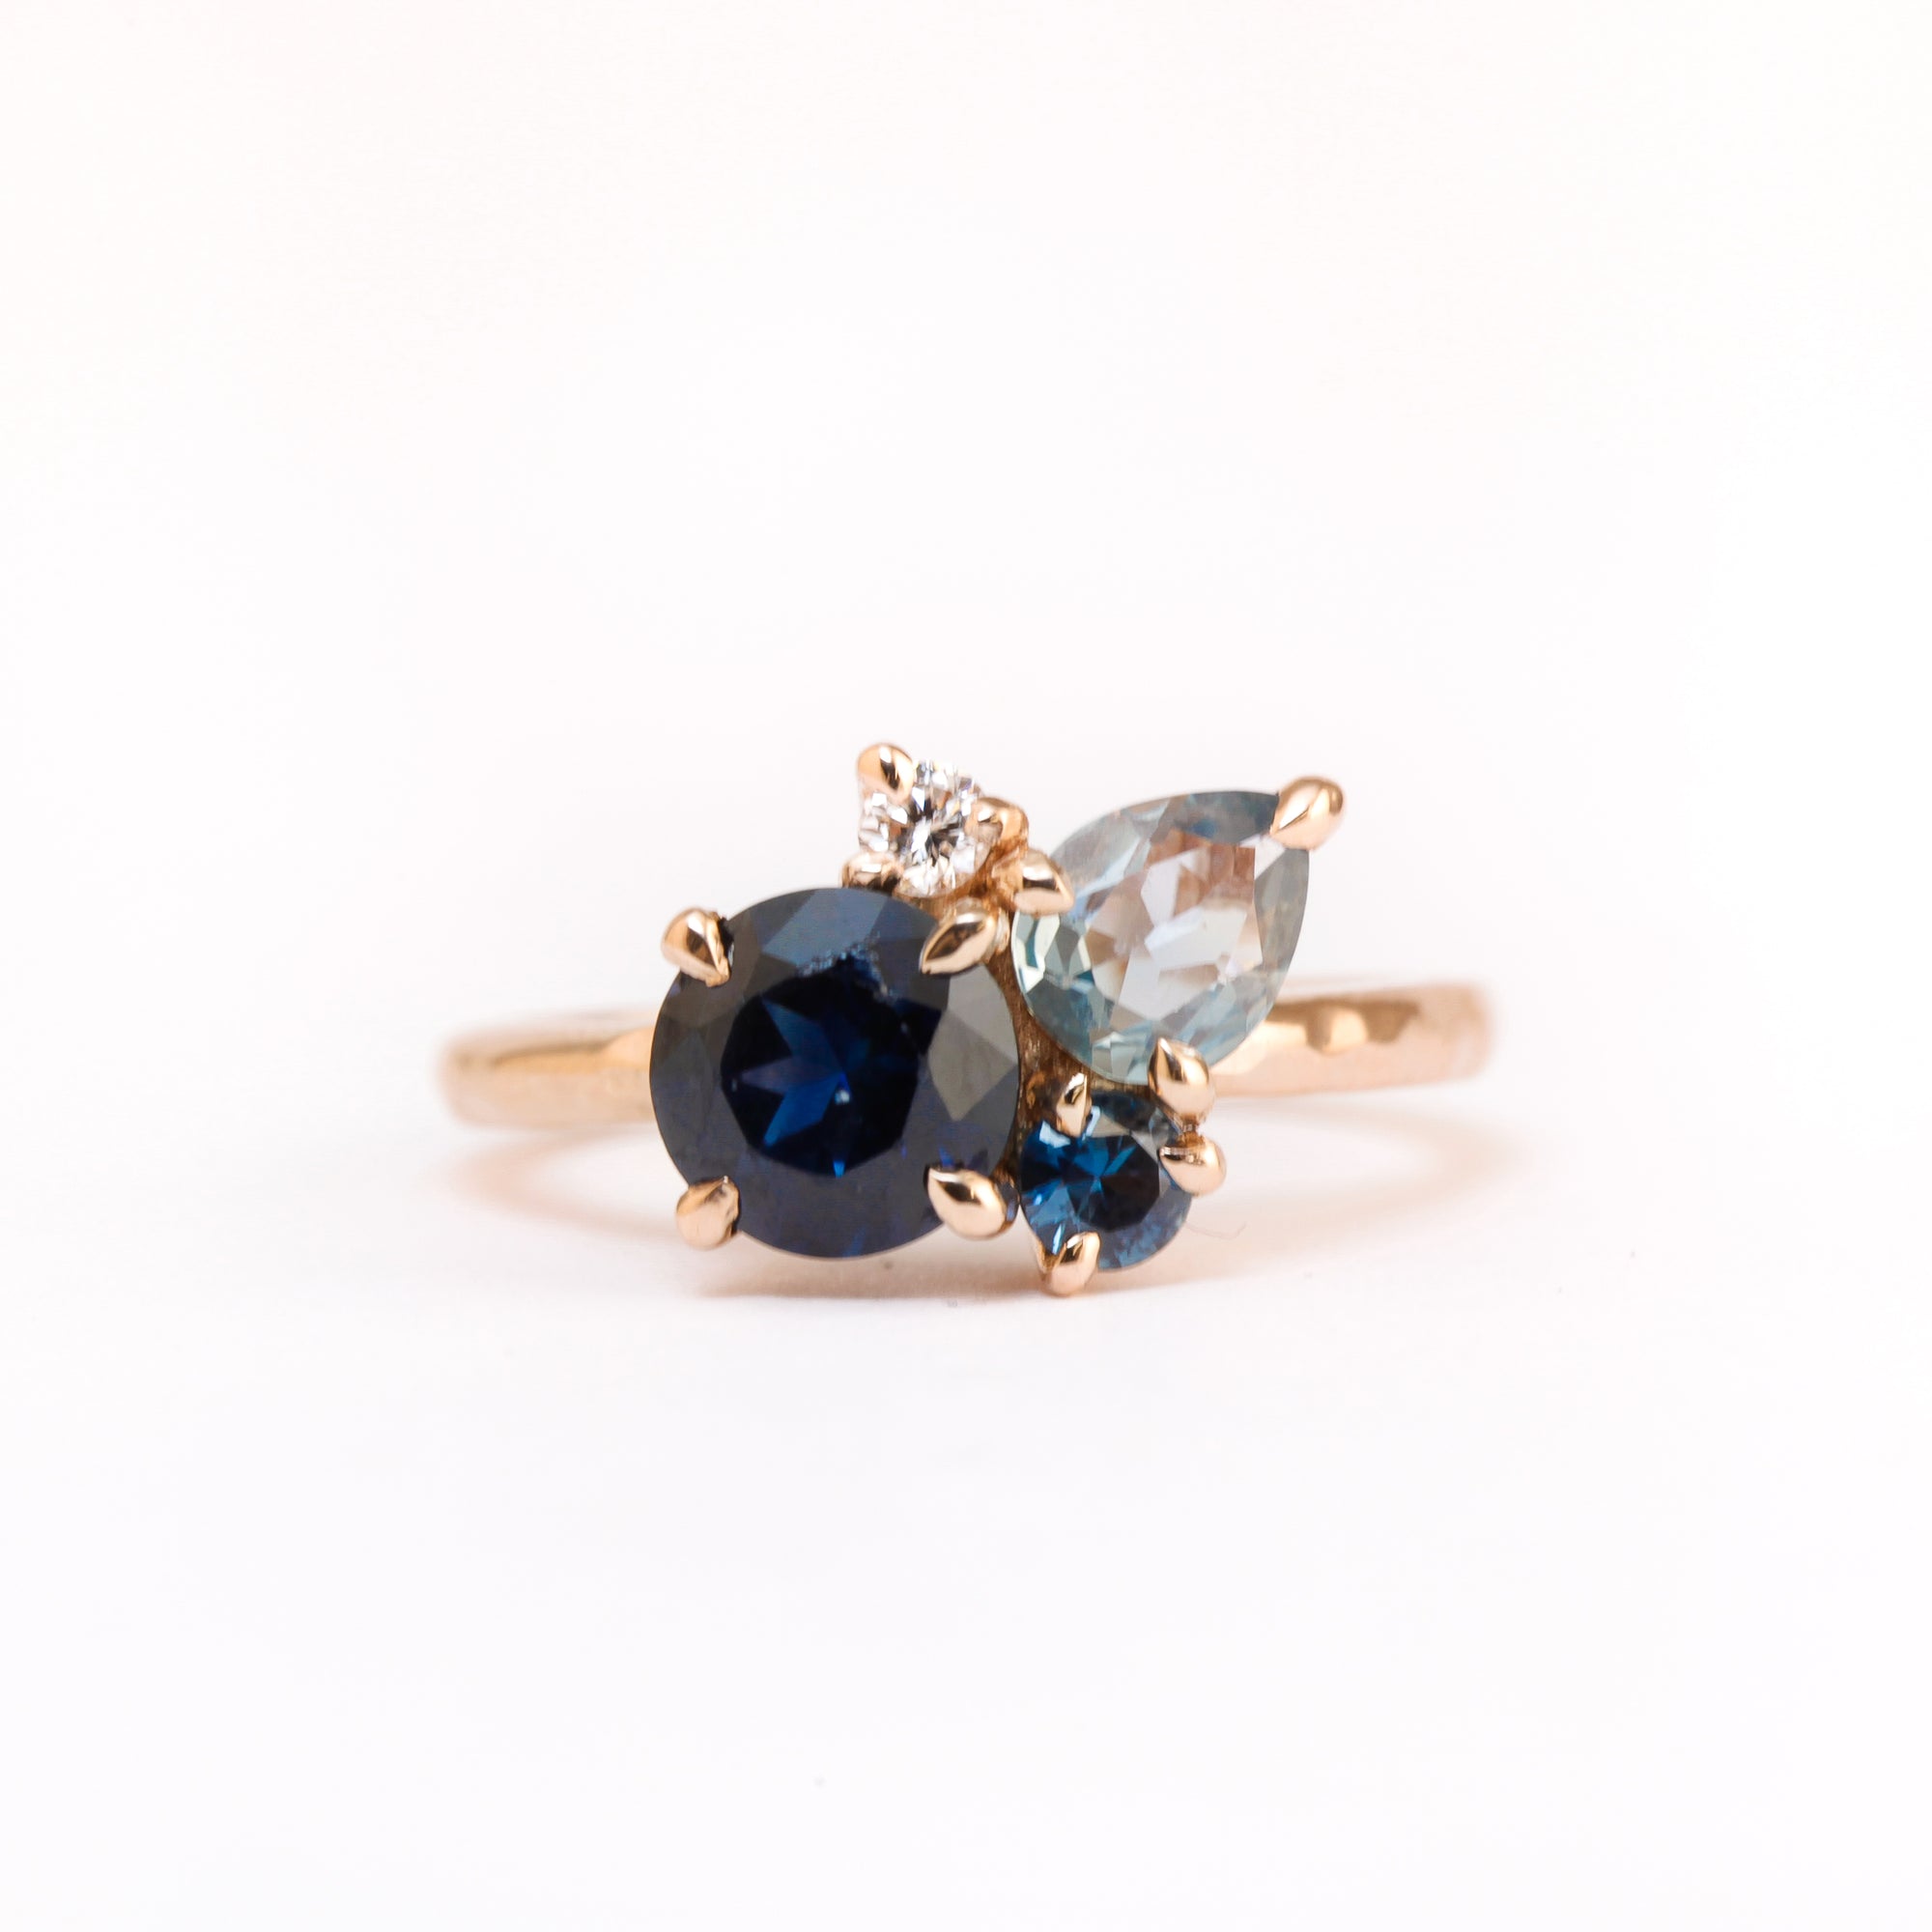 Made in Melbourne, 18ct rose gold ring with a mixture of round and pear cut ethically sourced sapphires.